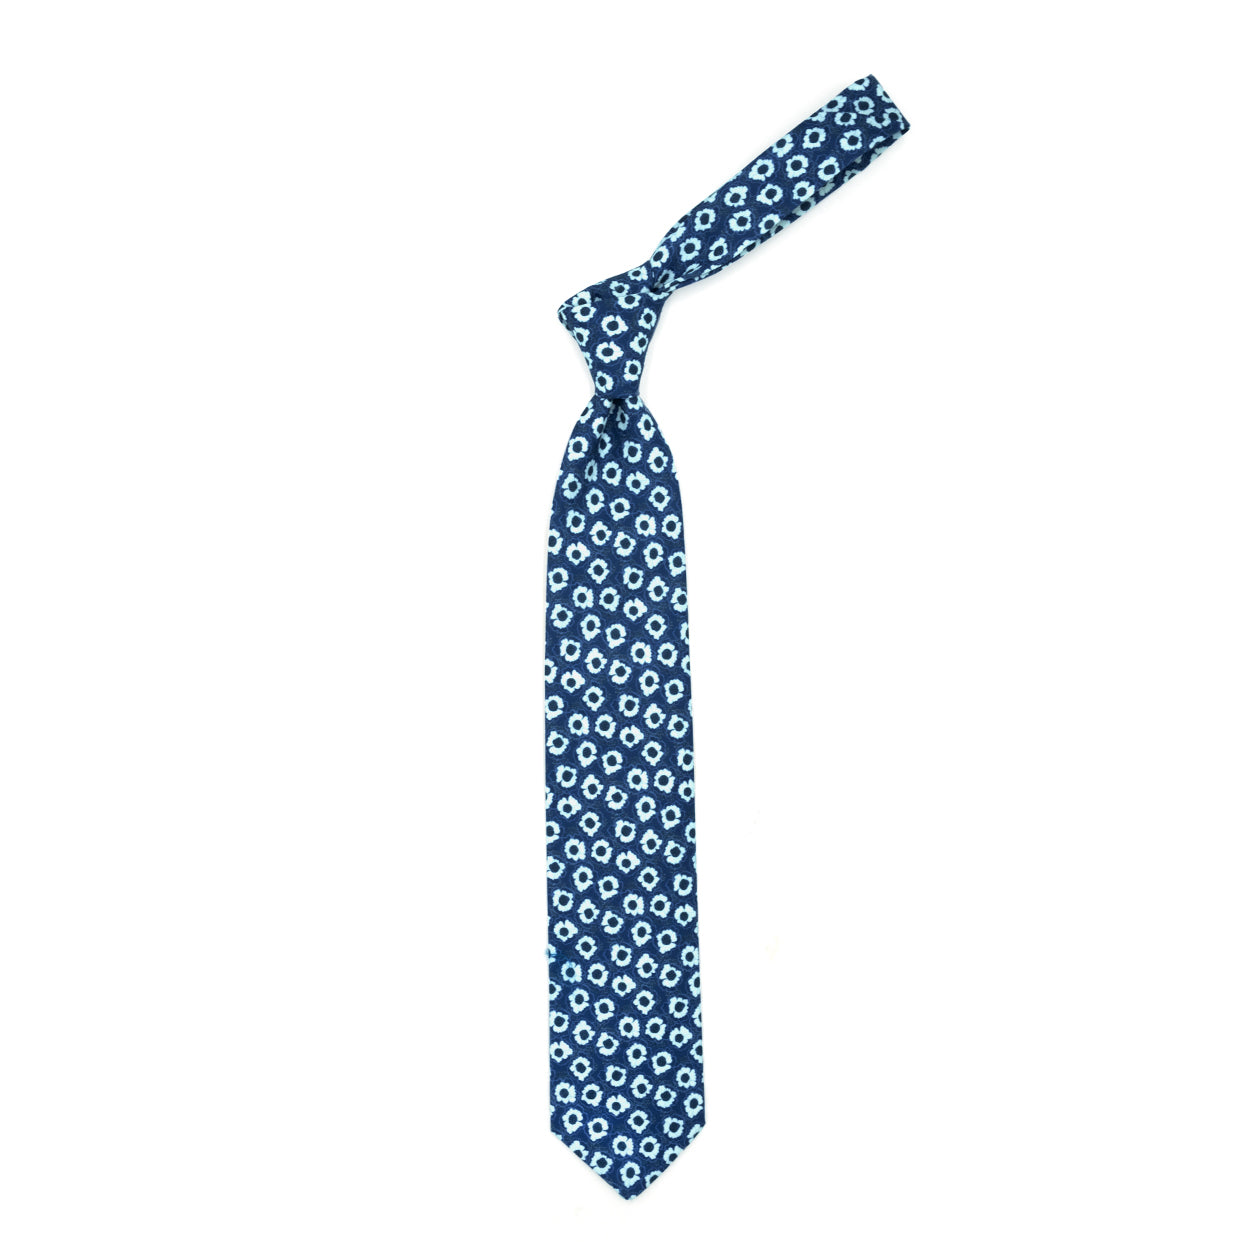 Blue tie with white flowers